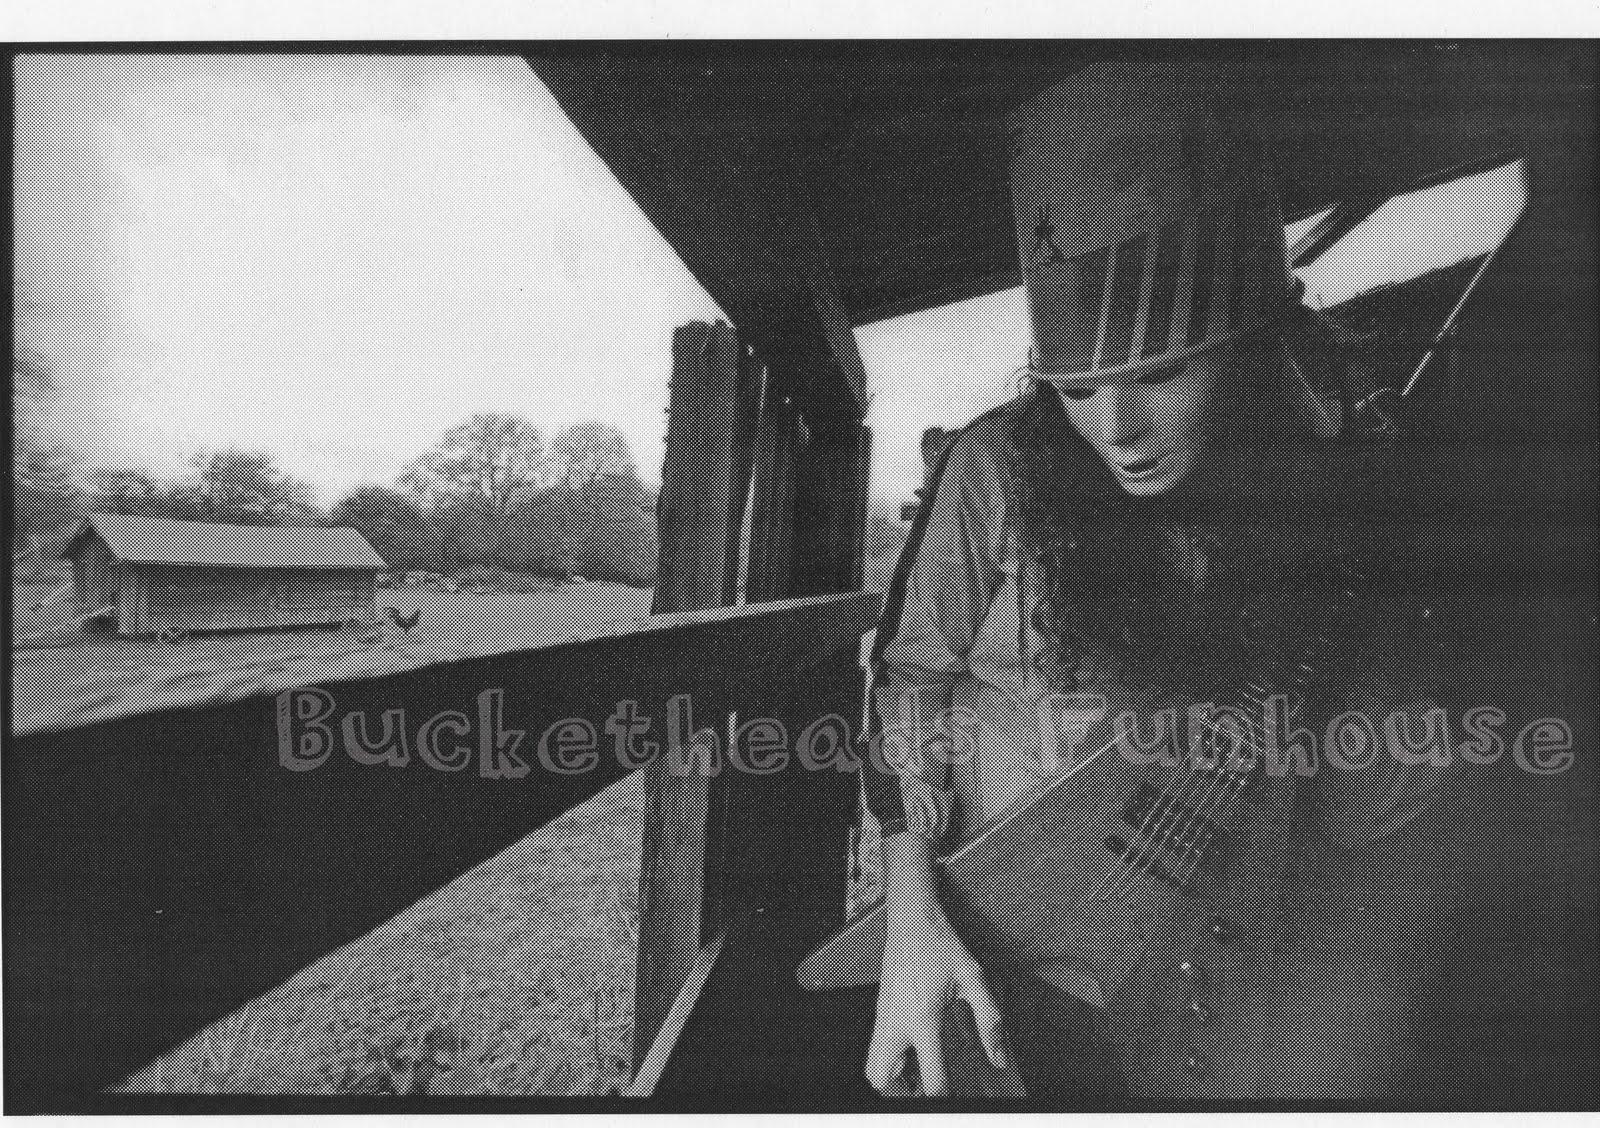 Buckethead on the farm, UK circa 1999. Photographed by Dave McKean ...